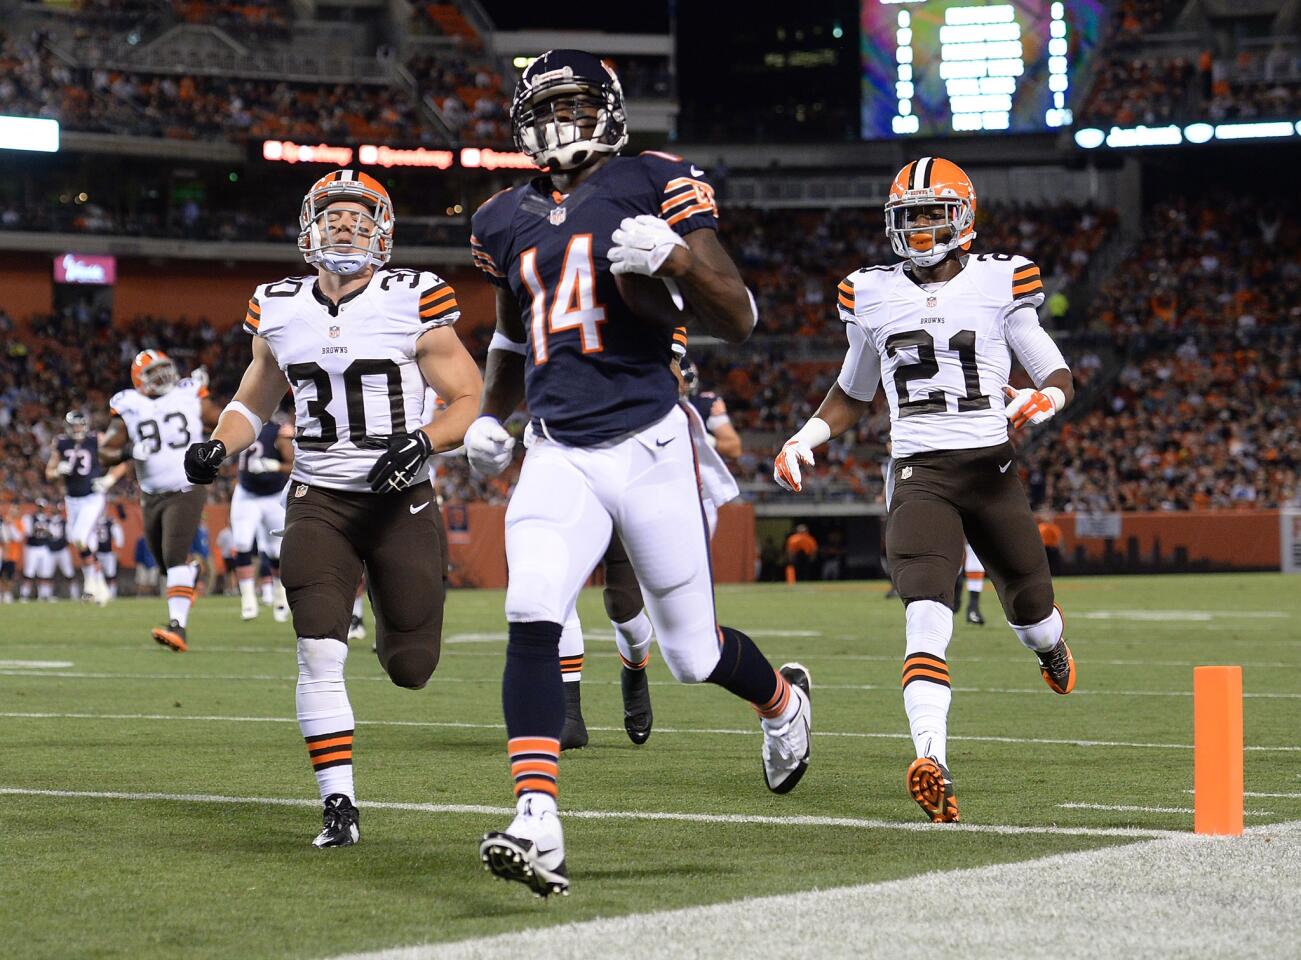 Santonio Holmes scores a touchdown in front of the Browns' Jim Leonhard and Justin Gilbert during the second quarter.